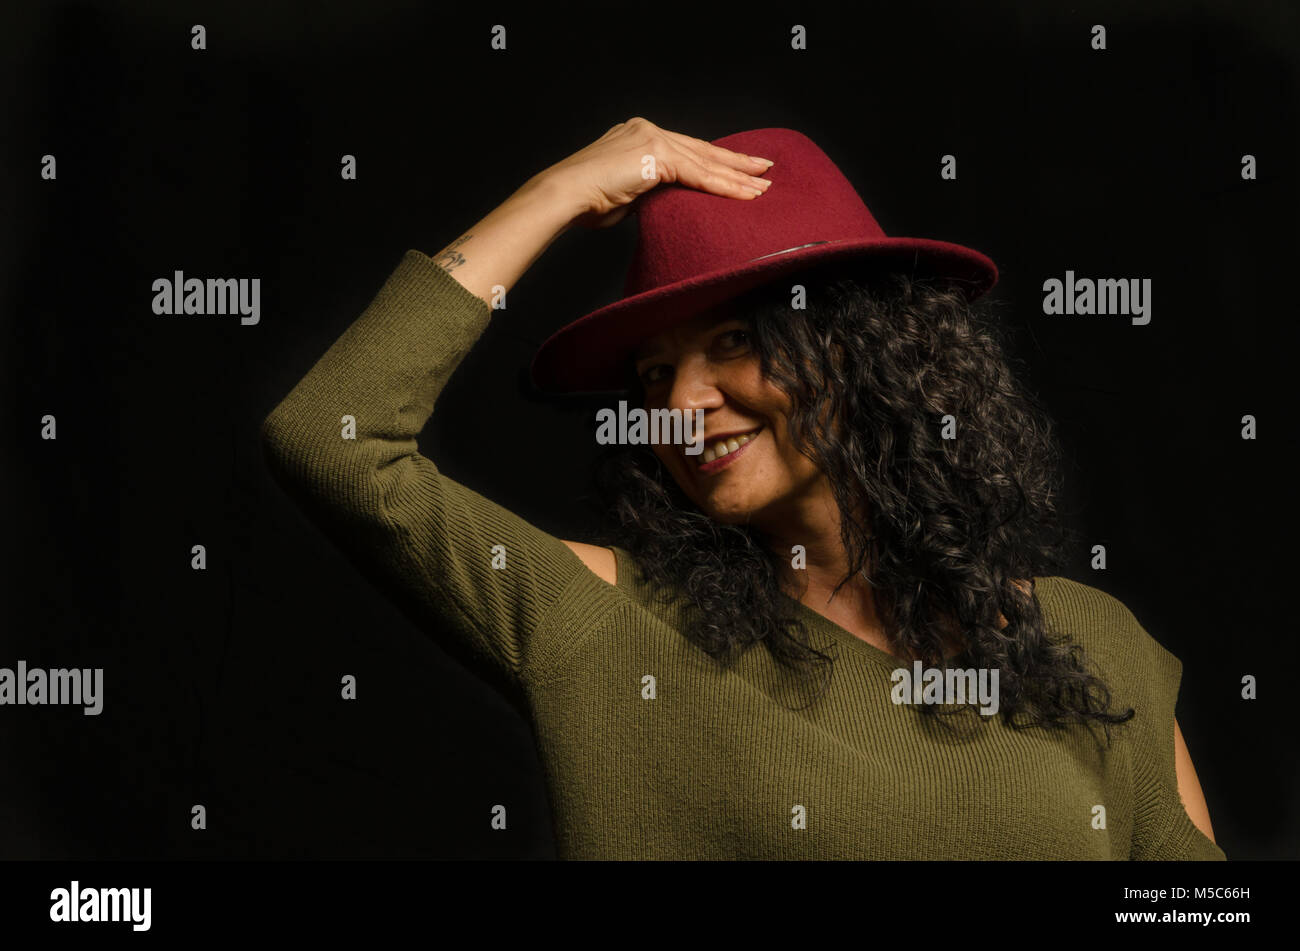 artificial light work in studio, a happy woman with a hat in her hand, Stock Photo